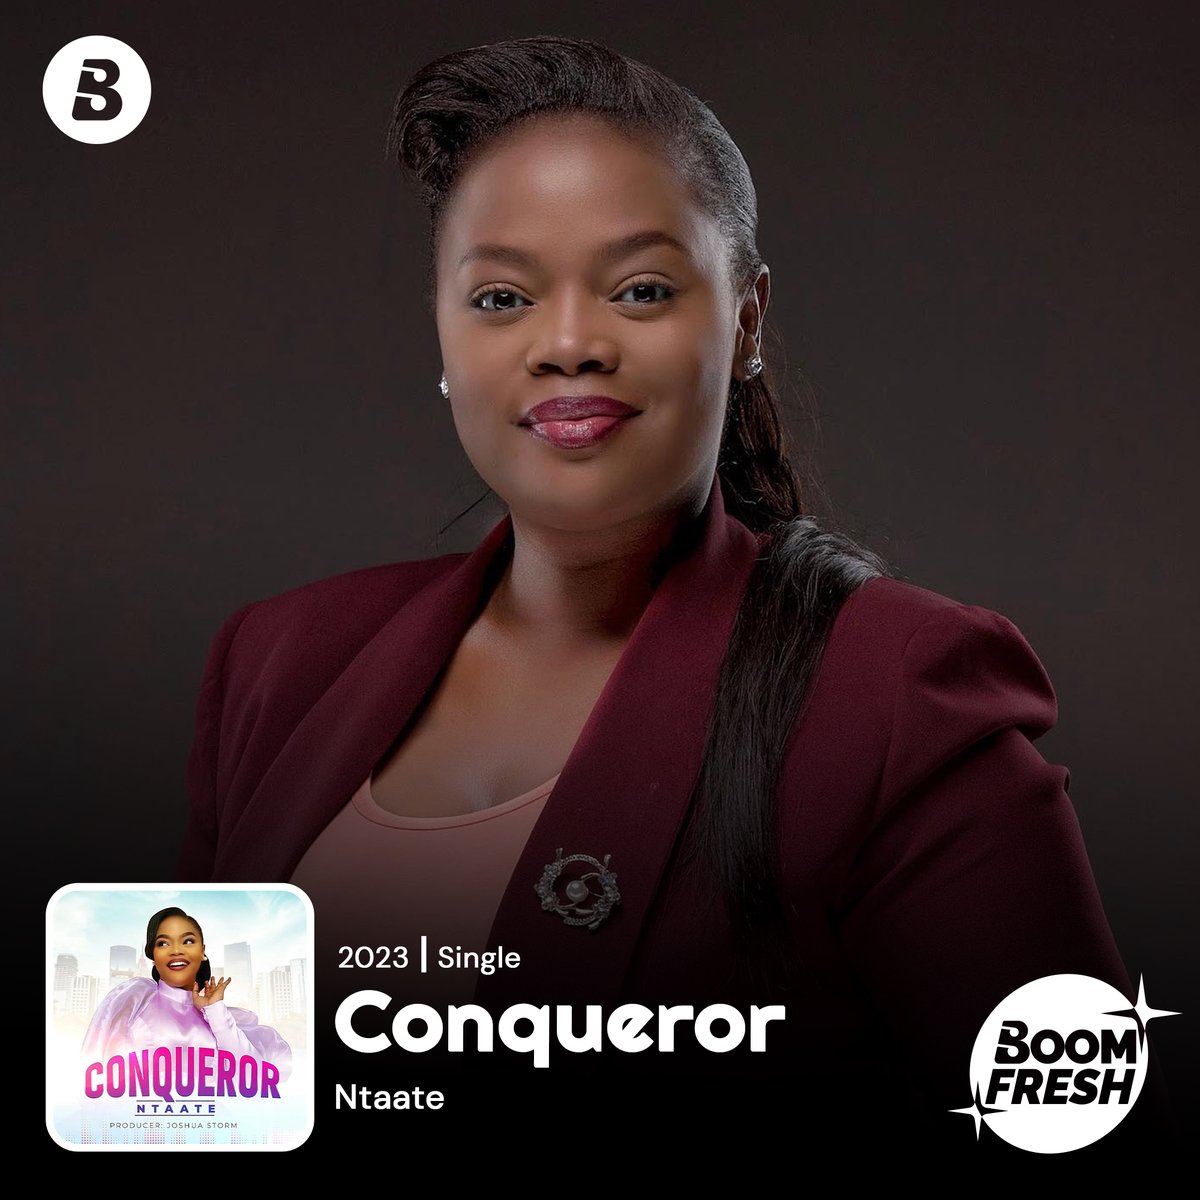 🚨BOOM FRESH🚨 Here's @Gabientaate 's fresh tune dubbed #Conqueror Check it out on #boomplay